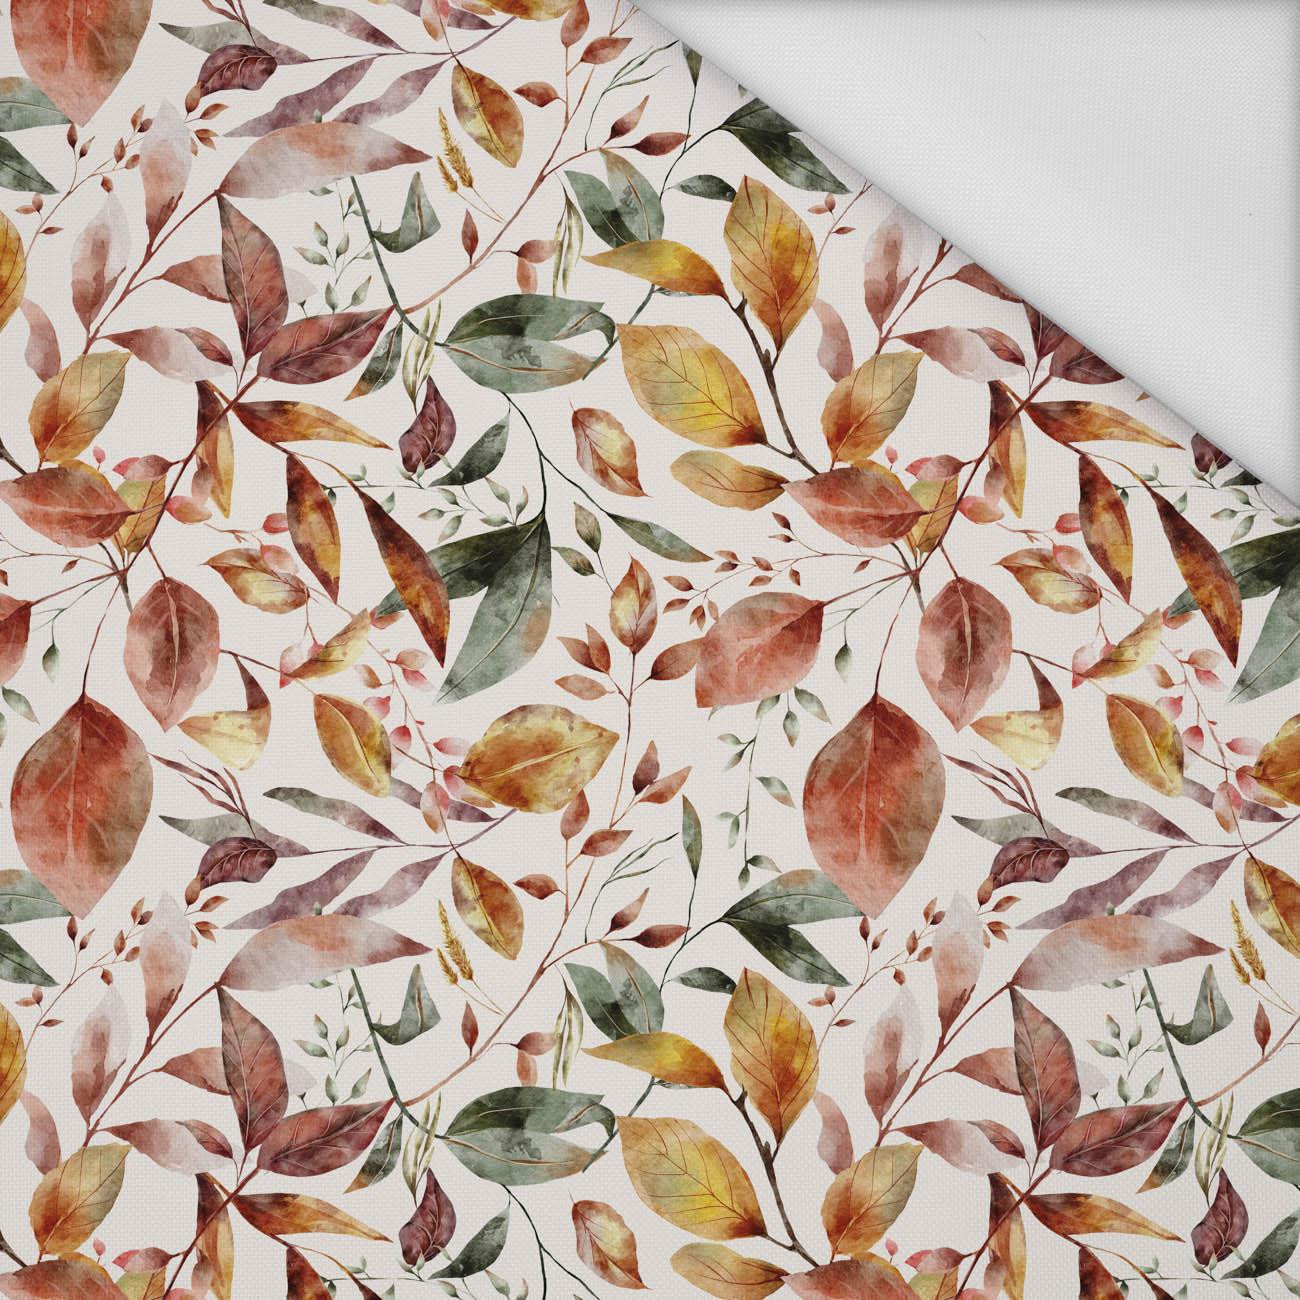 AUTUMN LEAVES PAT. 2 (COLORFUL AUTUMN) - Waterproof woven fabric